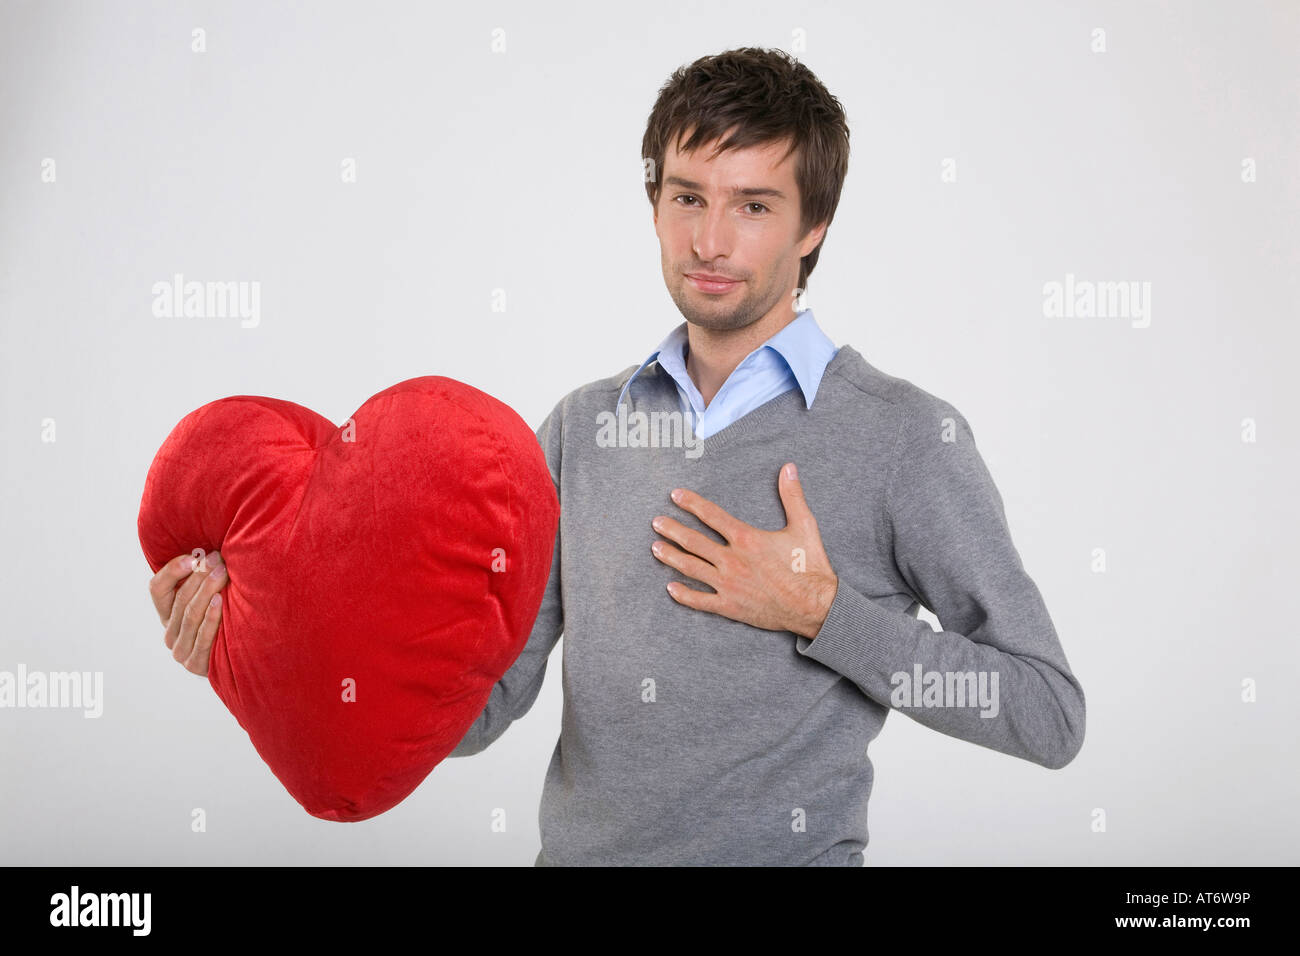 young-man-holding-heart-shaped-cushion-portrait-AT6W9P.jpg